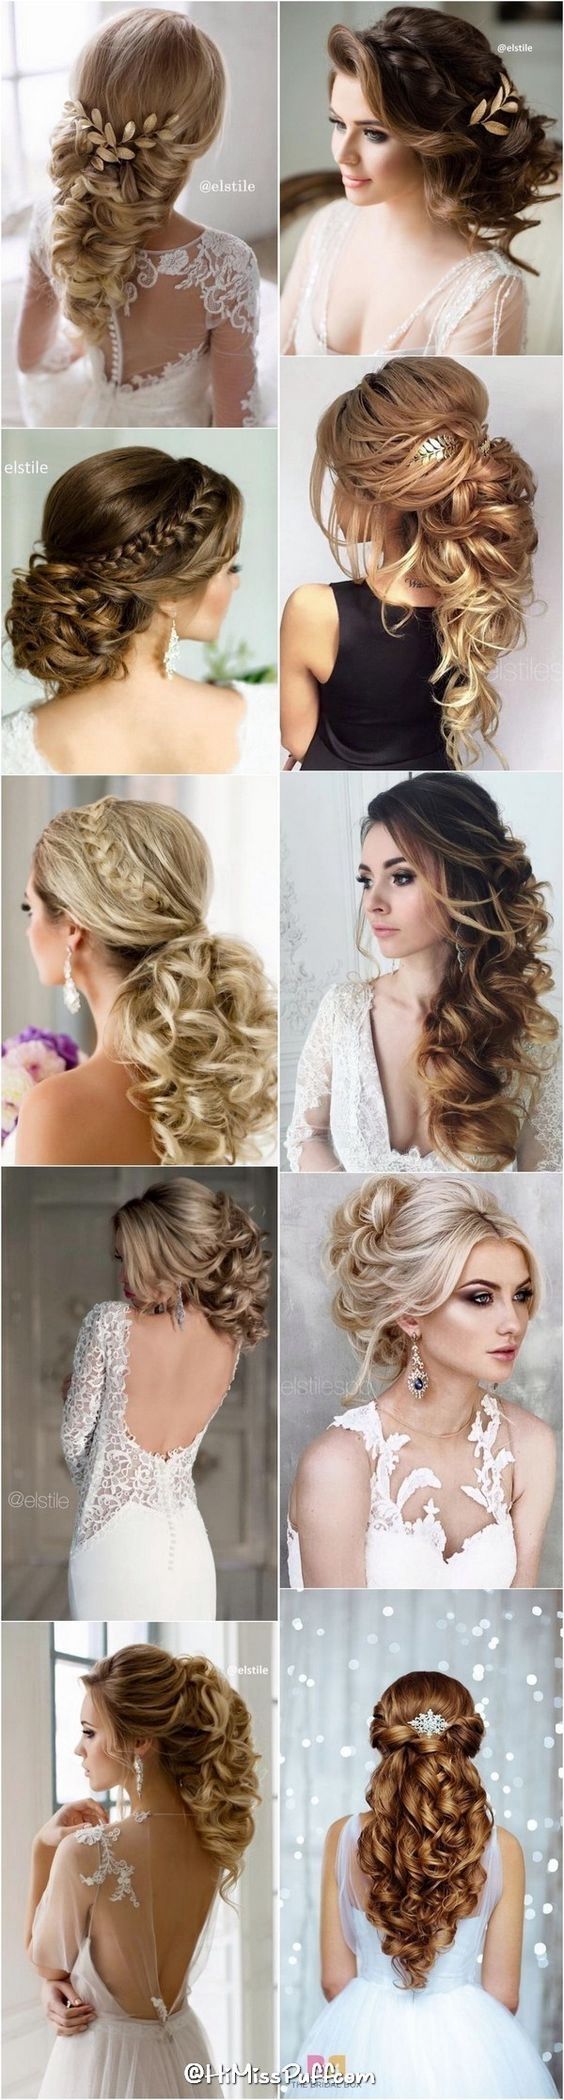 Fashionable Wedding Hairstyles For Long Hair For Bridesmaids Intended For 100+ Romantic Long Wedding Hairstyles 2018 – Curls, Half Up, Updos (View 11 of 15)